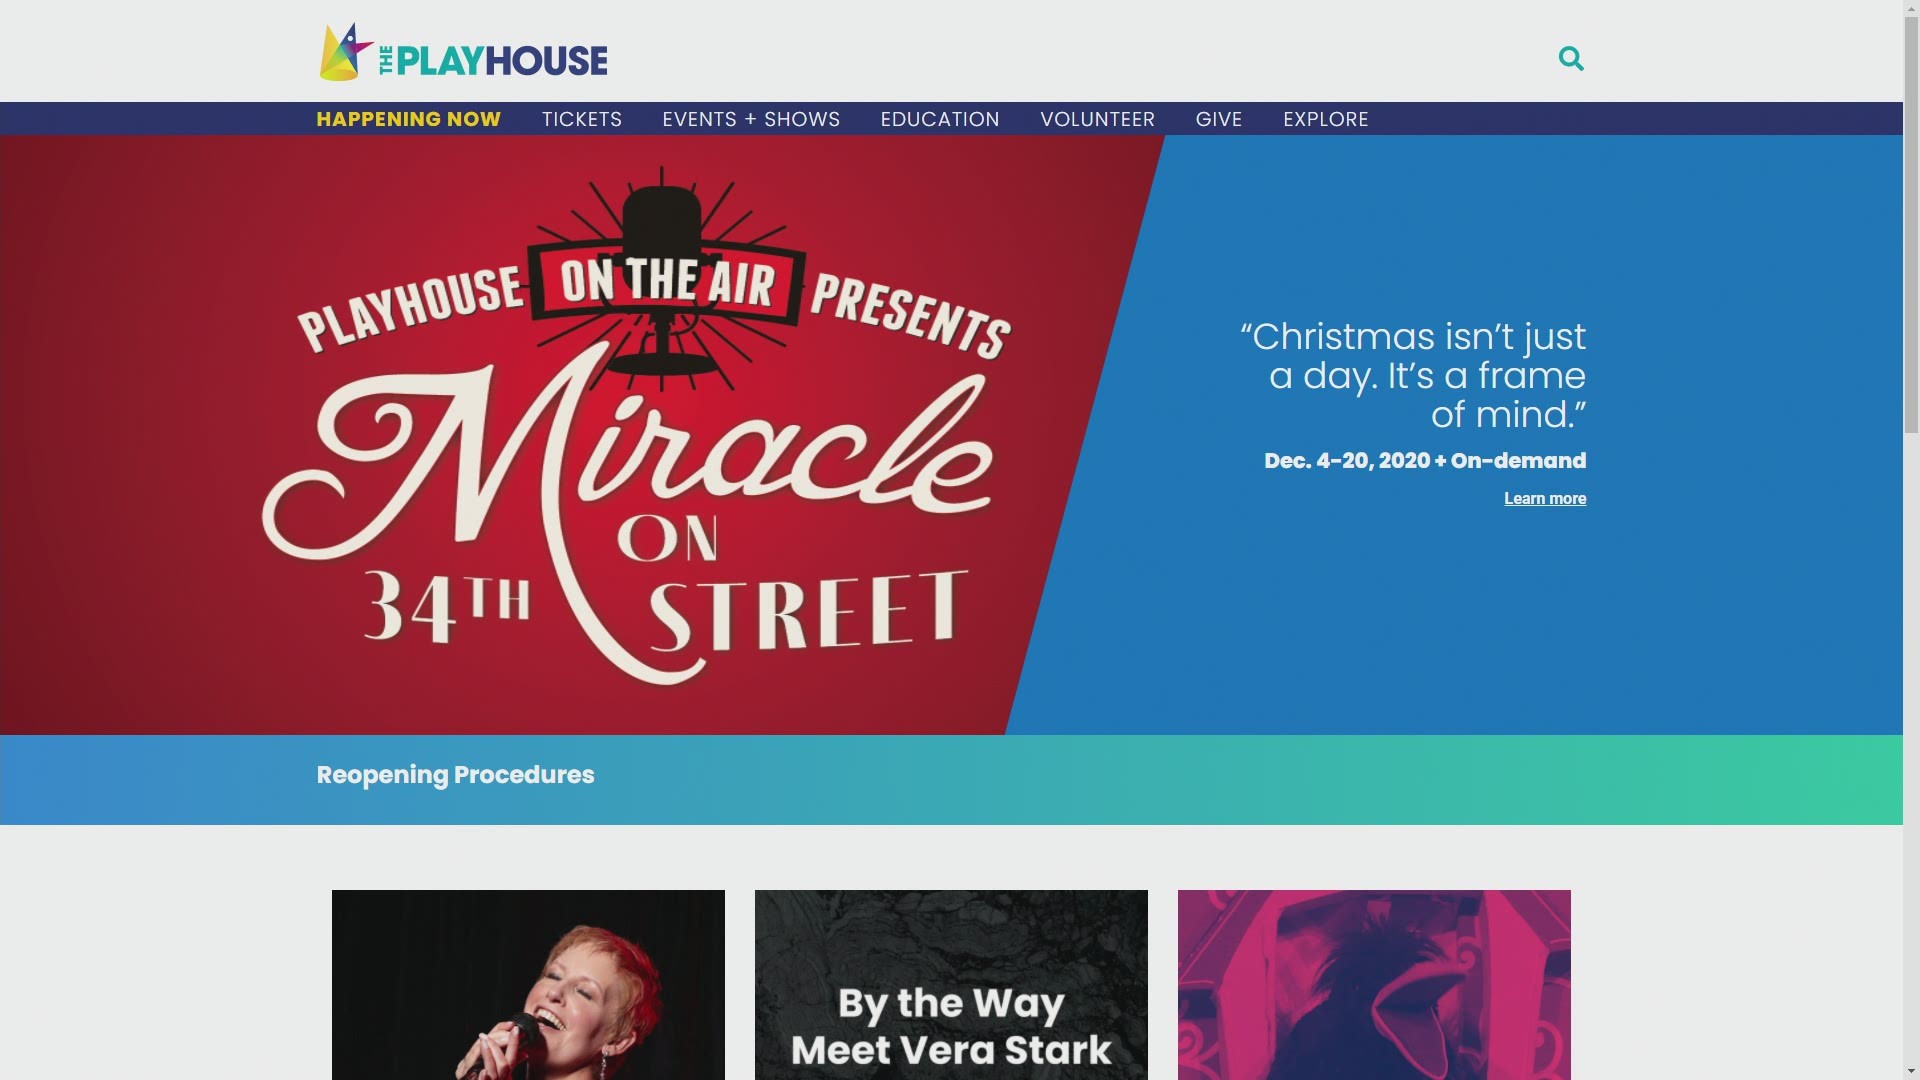 The Playhouse has a unique presentation of Miracle on 34th Street told through a radio play